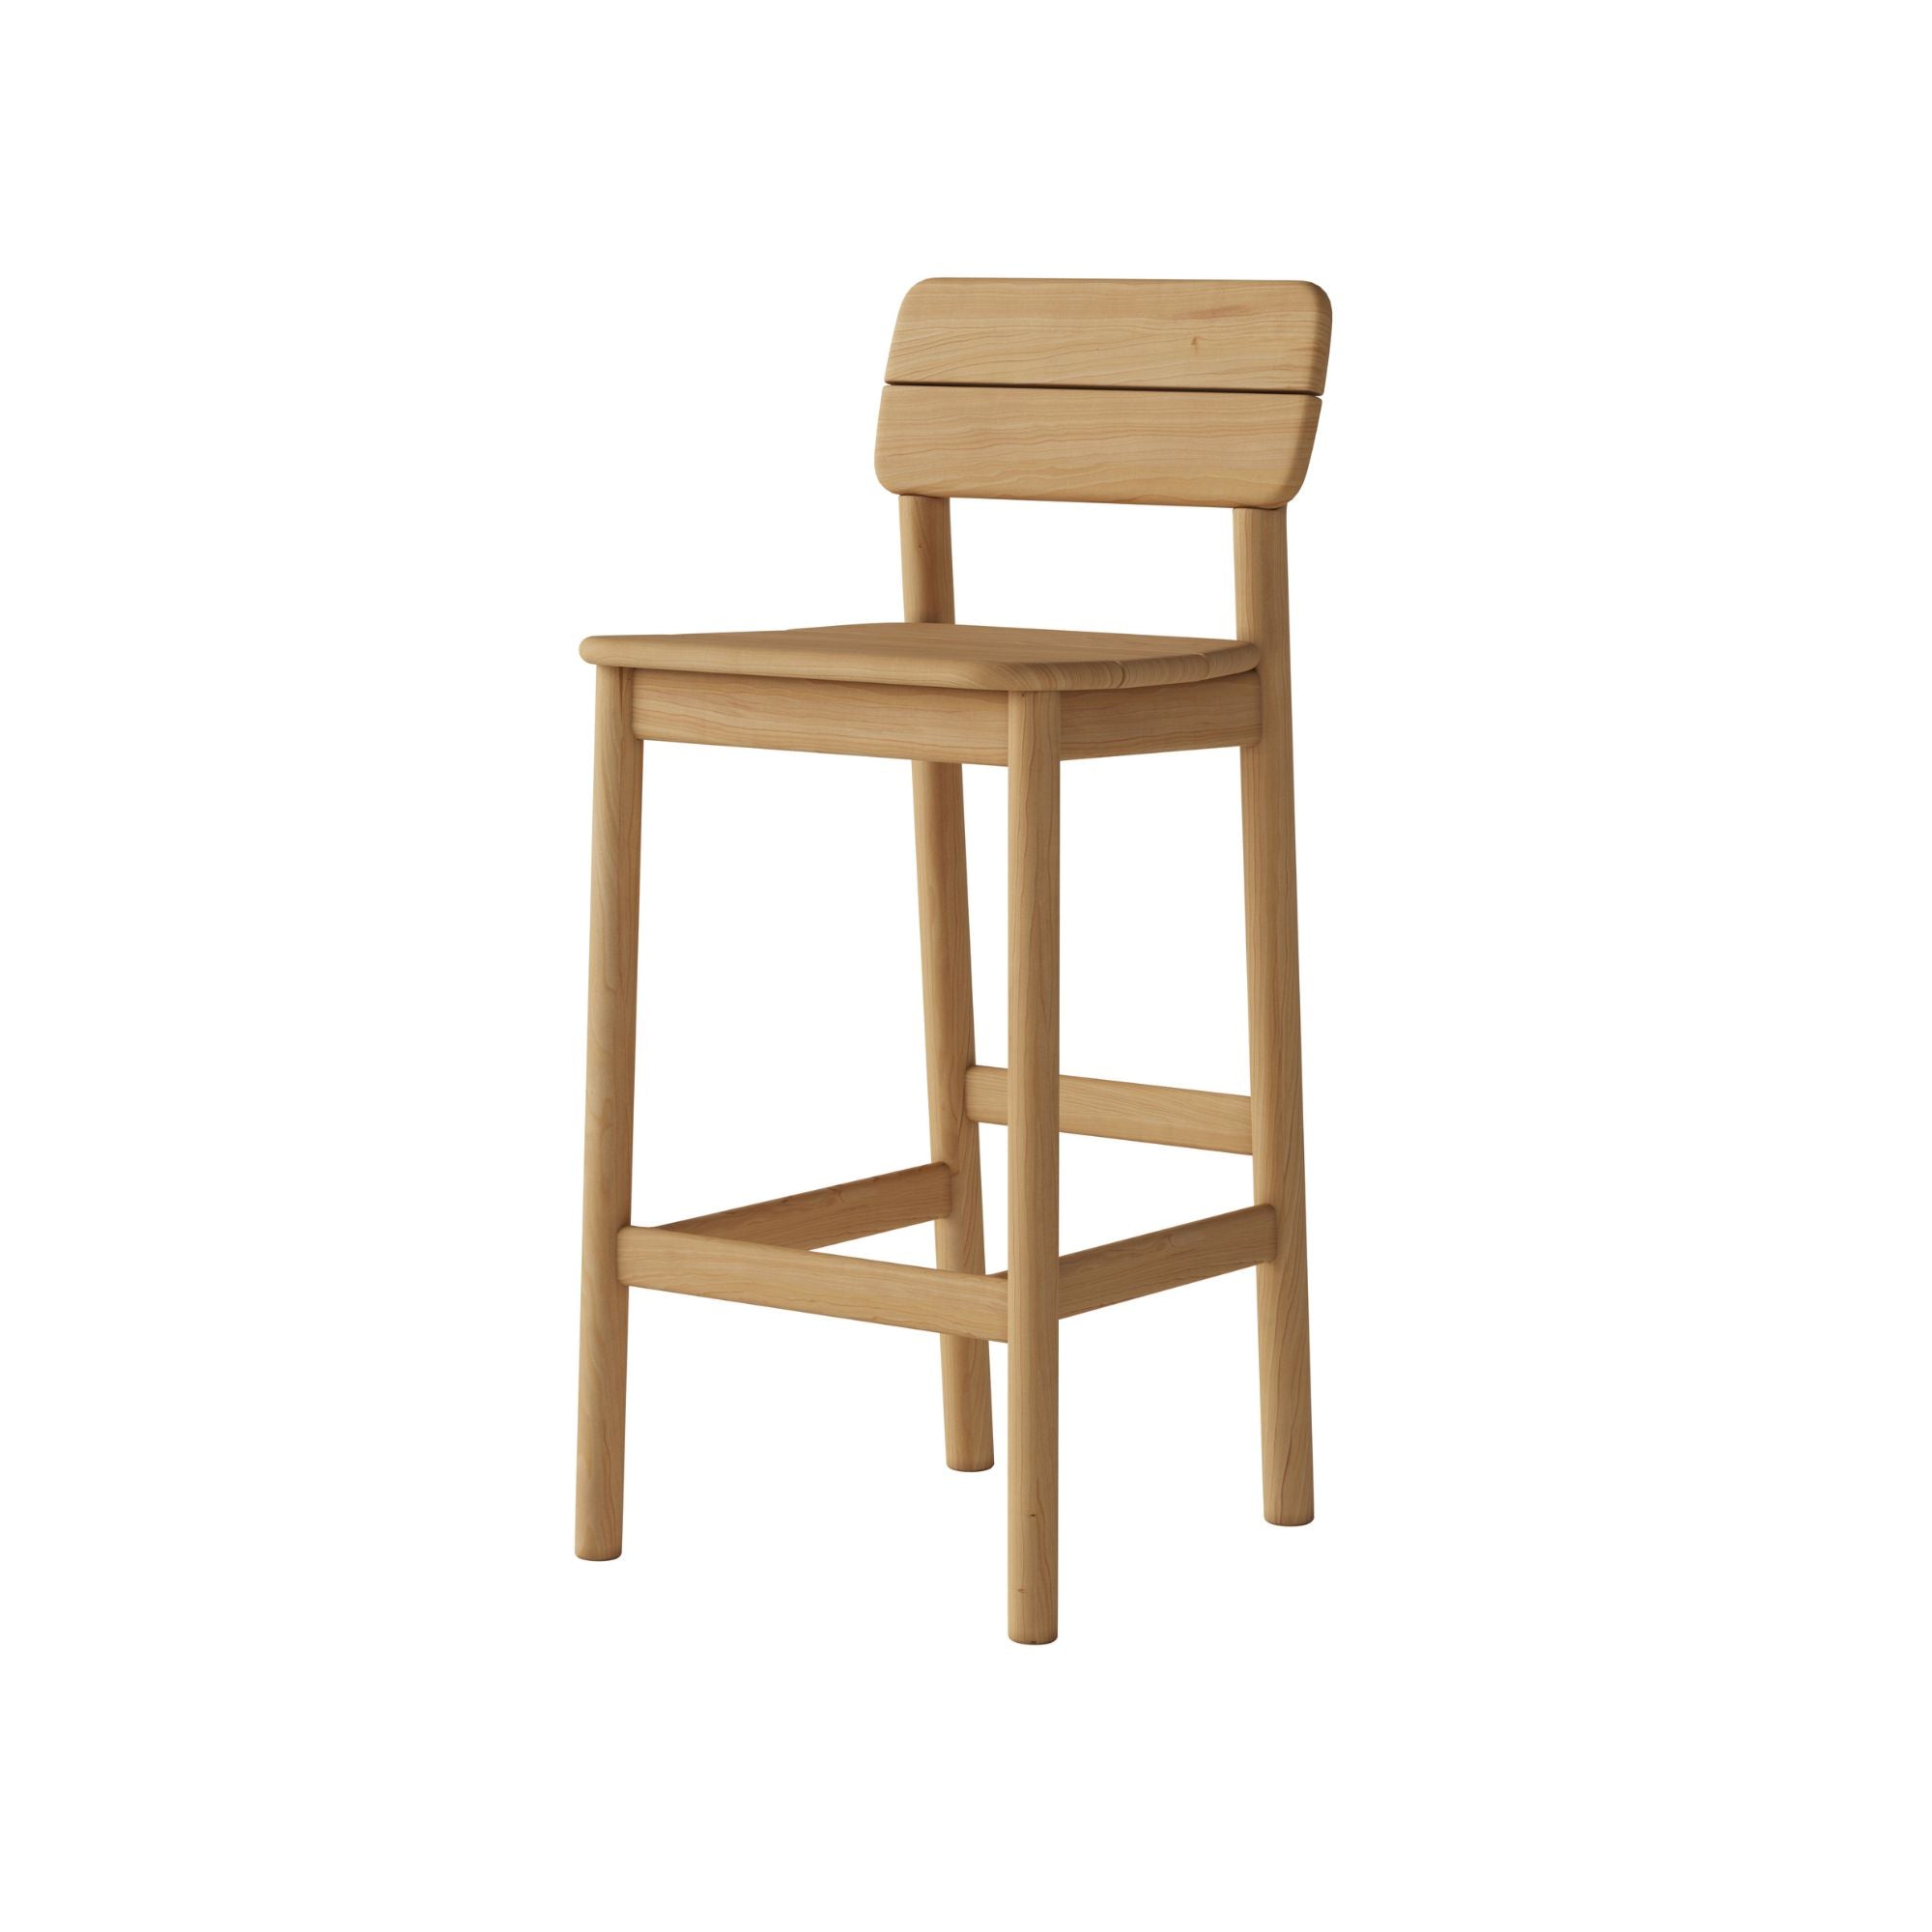 Tanso Bar Stool - THAT COOL LIVING